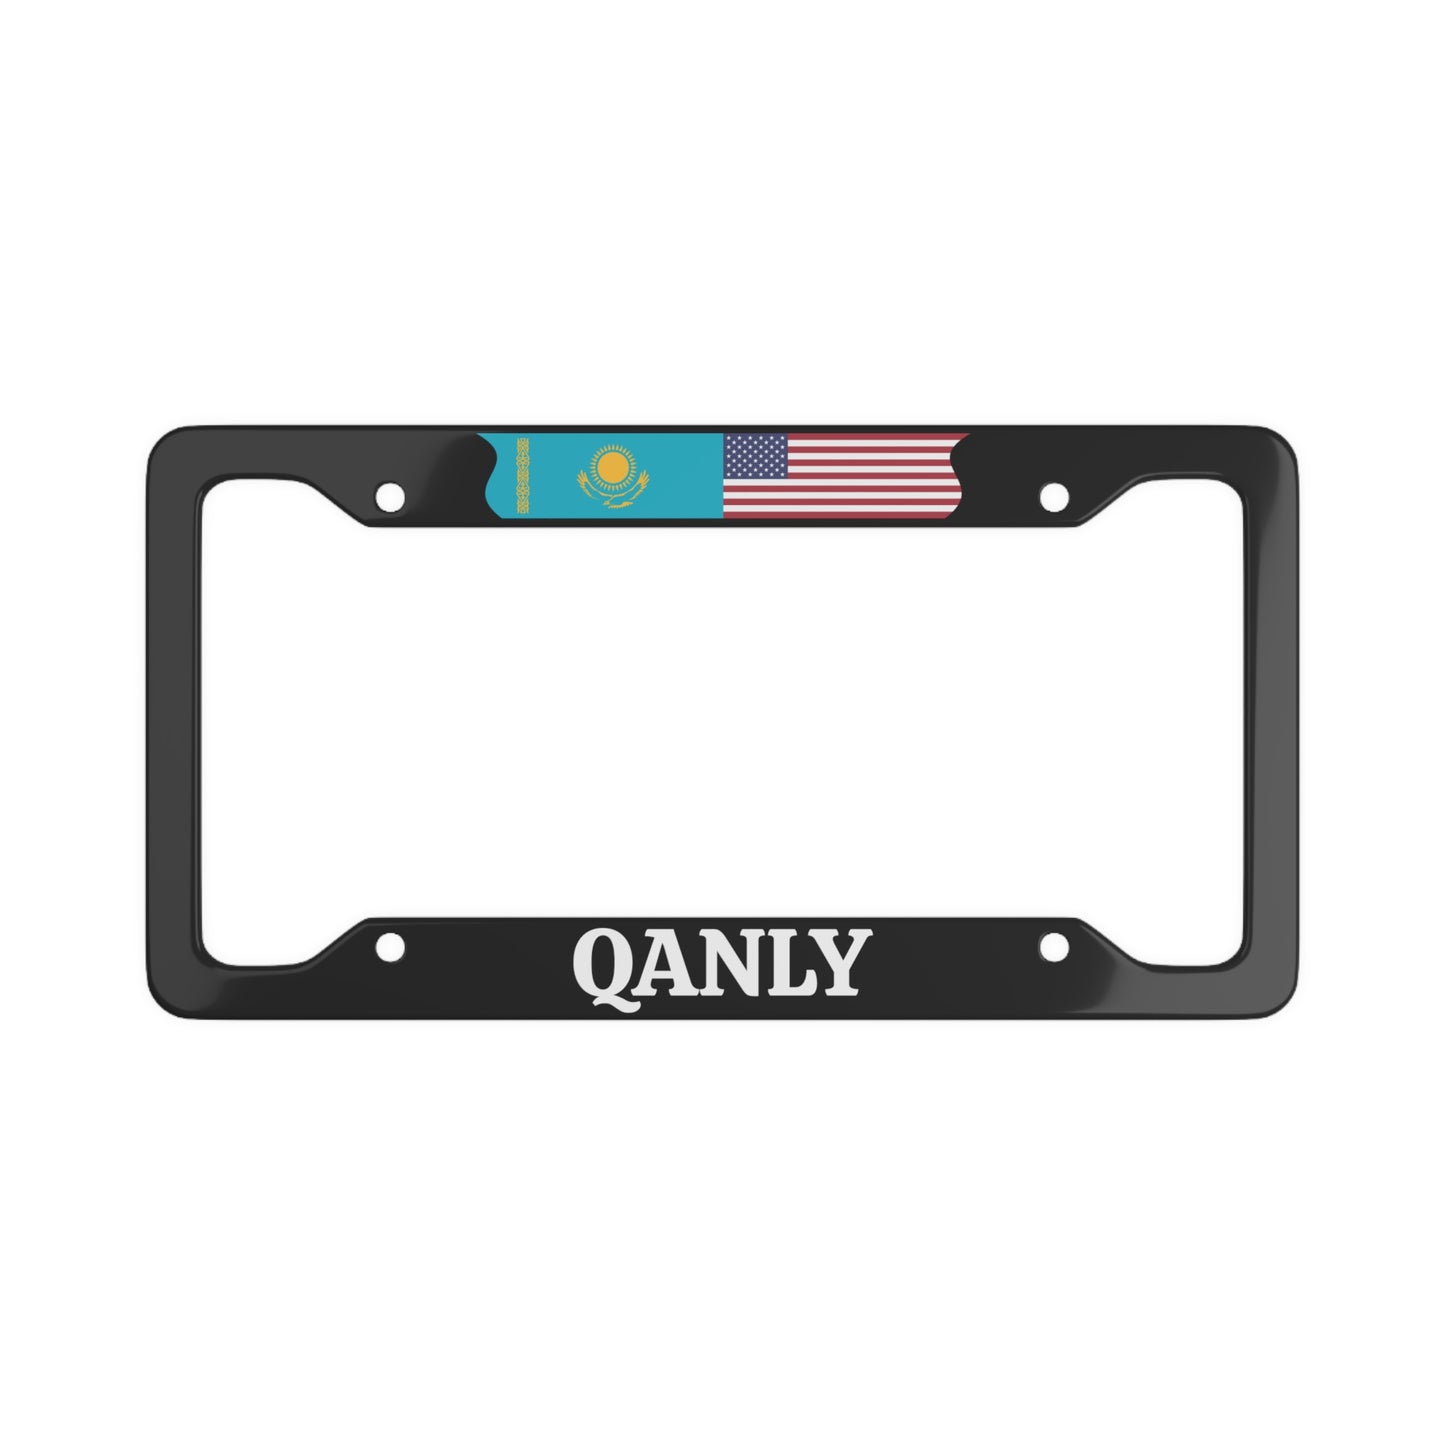 QANLY with flag License Plate Frame